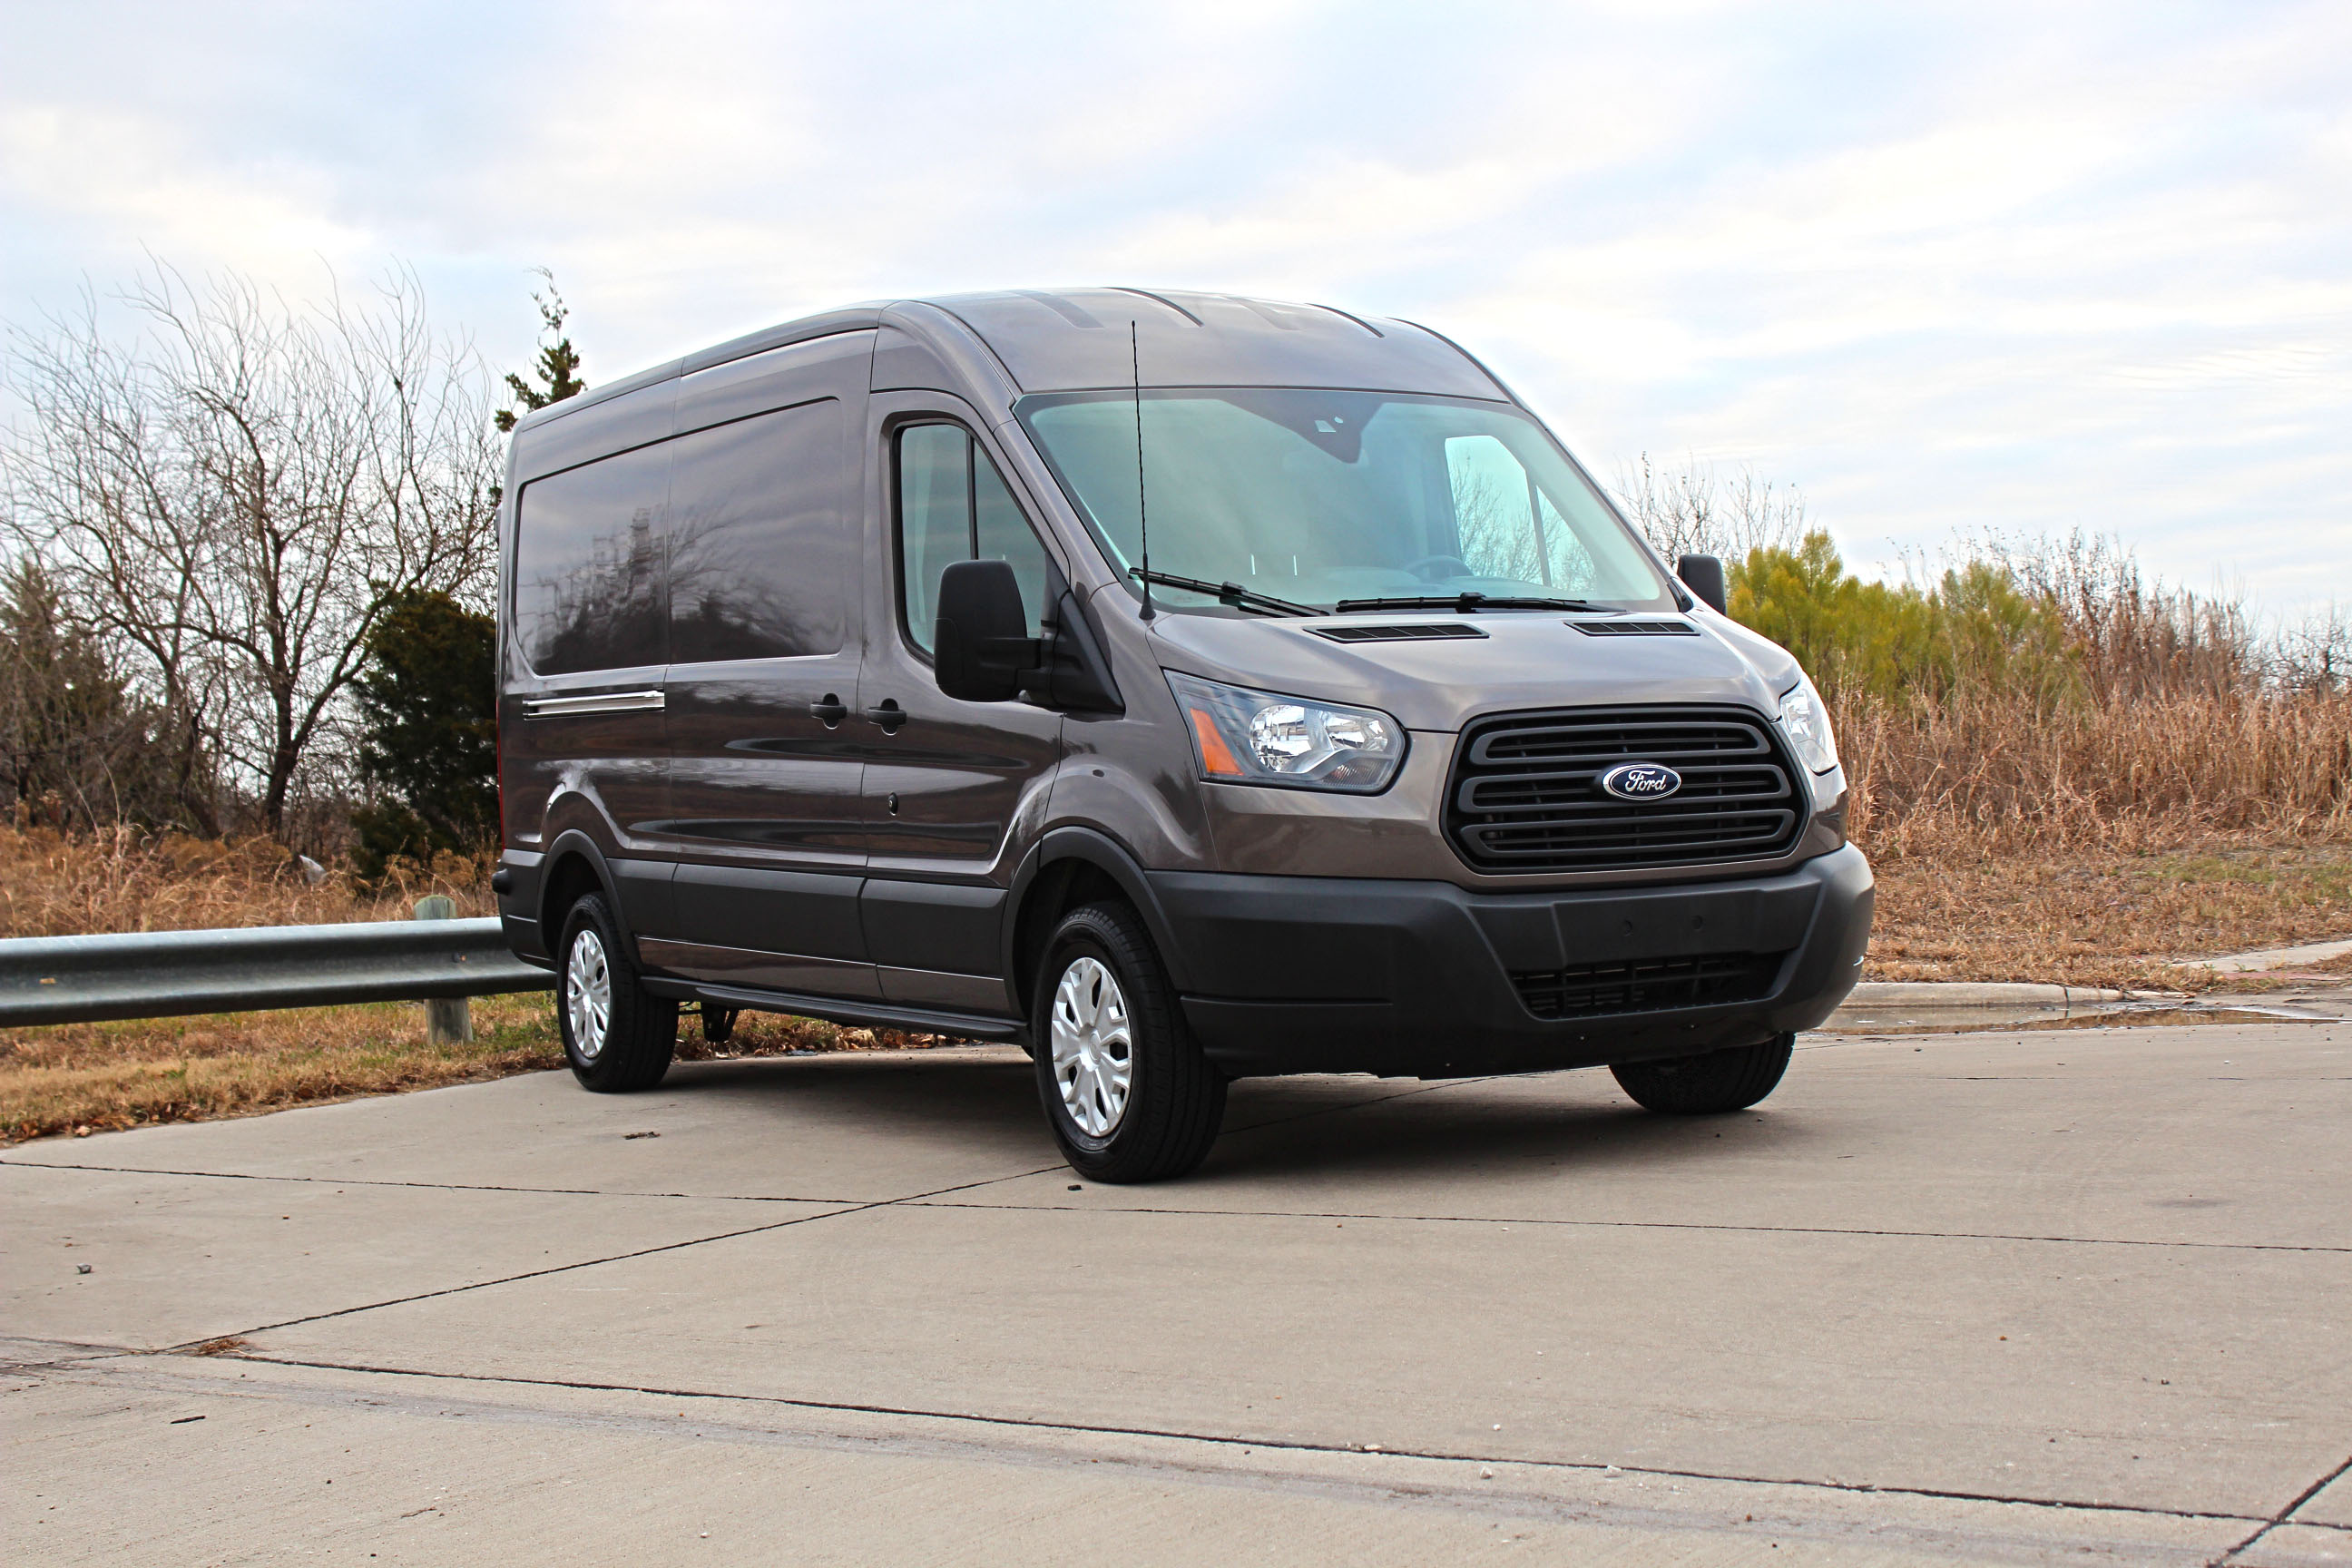 The 2015 Ford Transit Commercial Van